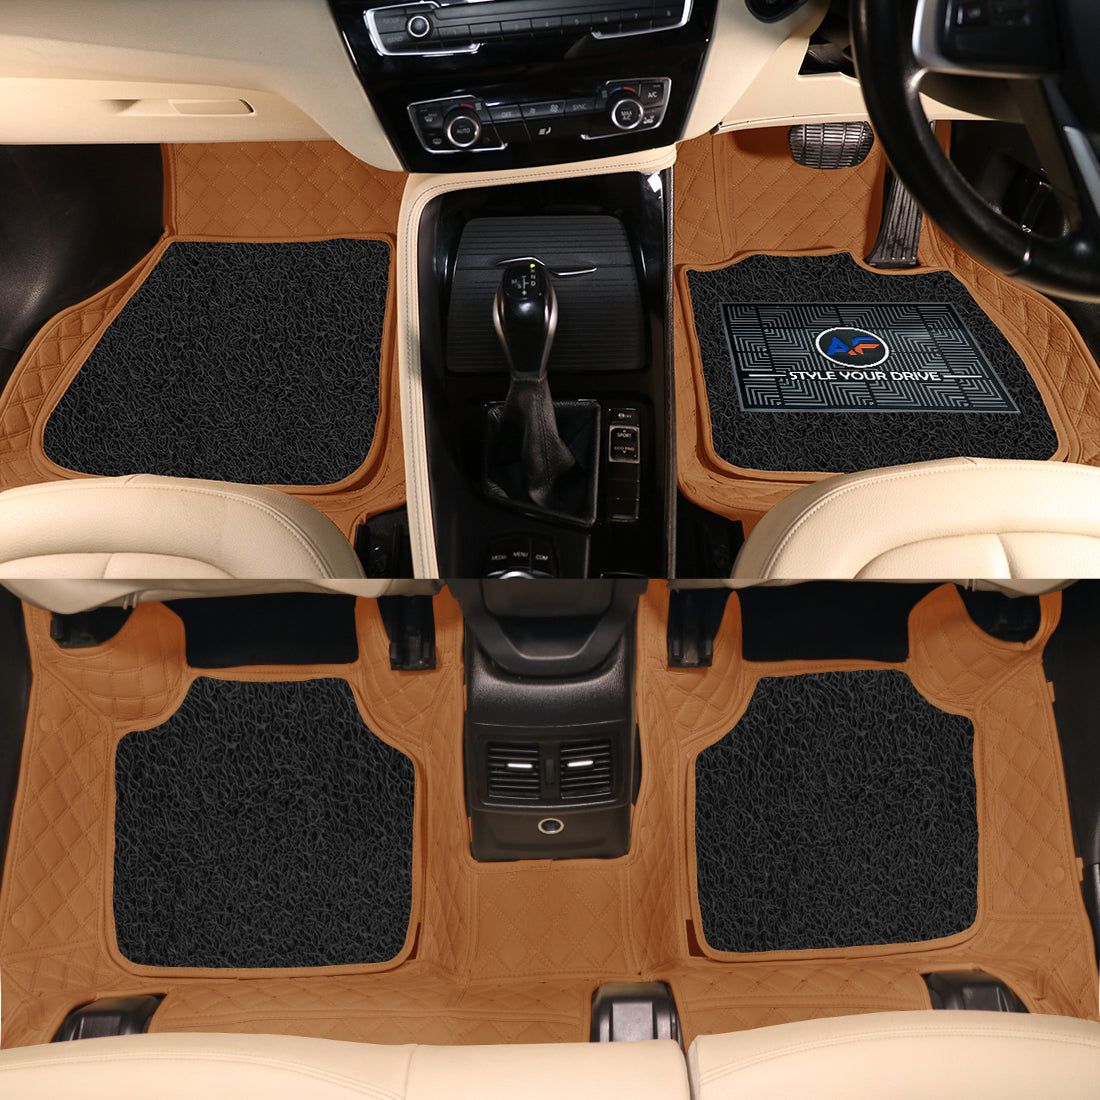 Audi A8L 2014-19 7D Luxury Car Mat, All Weather Proof, Anti-Skid, 100% Waterproof & Odorless with Unique Diamond Fish Design (24mm Luxury PU Leather, 2 Rows)